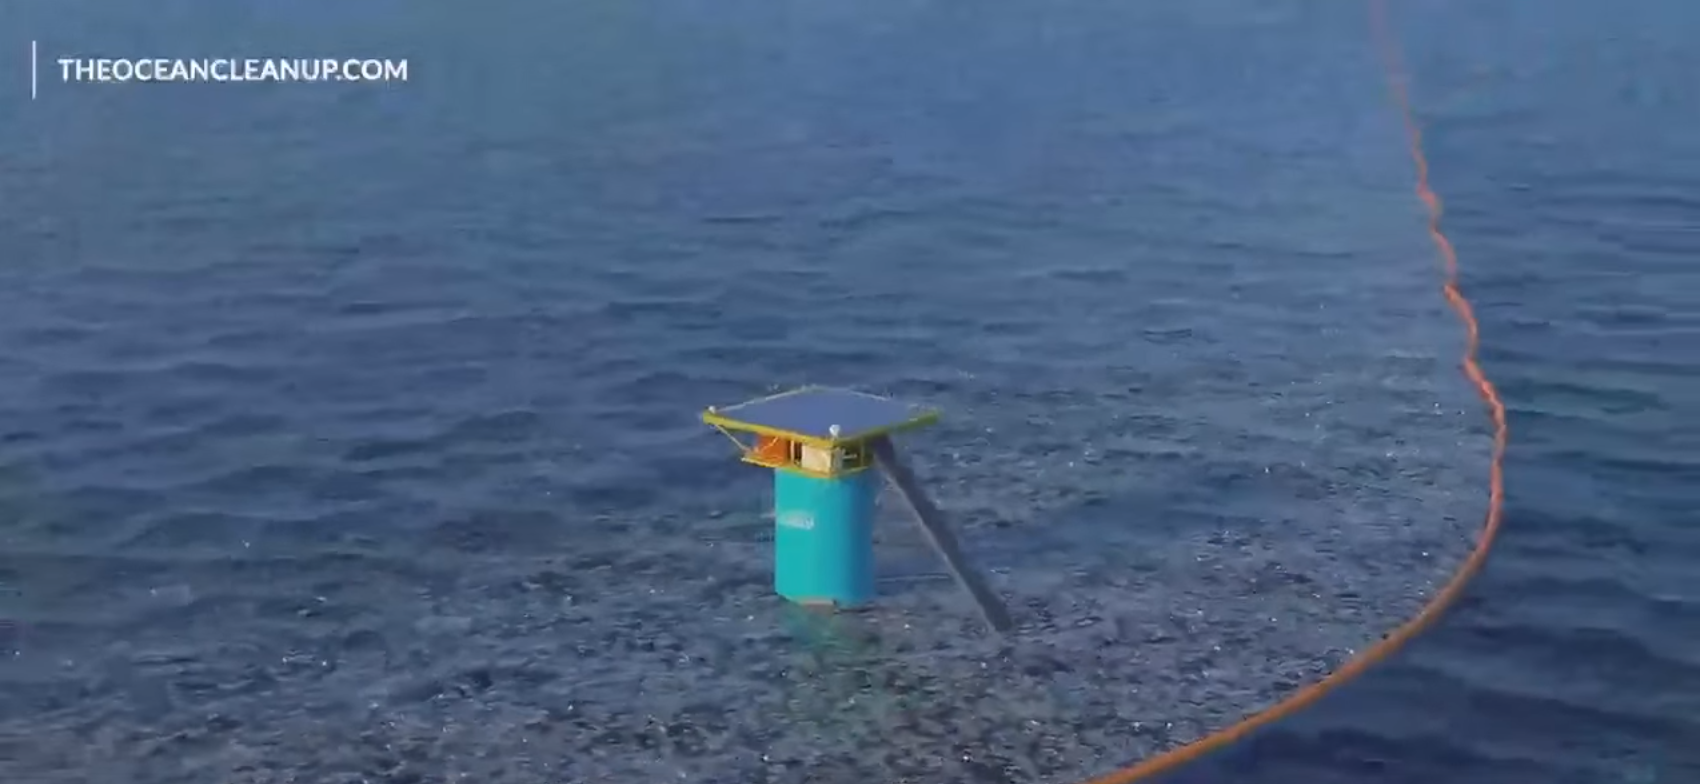 21-Yr-Old Inventor Says His System Can Clean up ‘Great Pacific Garbage Patch’ in 20 Yrs